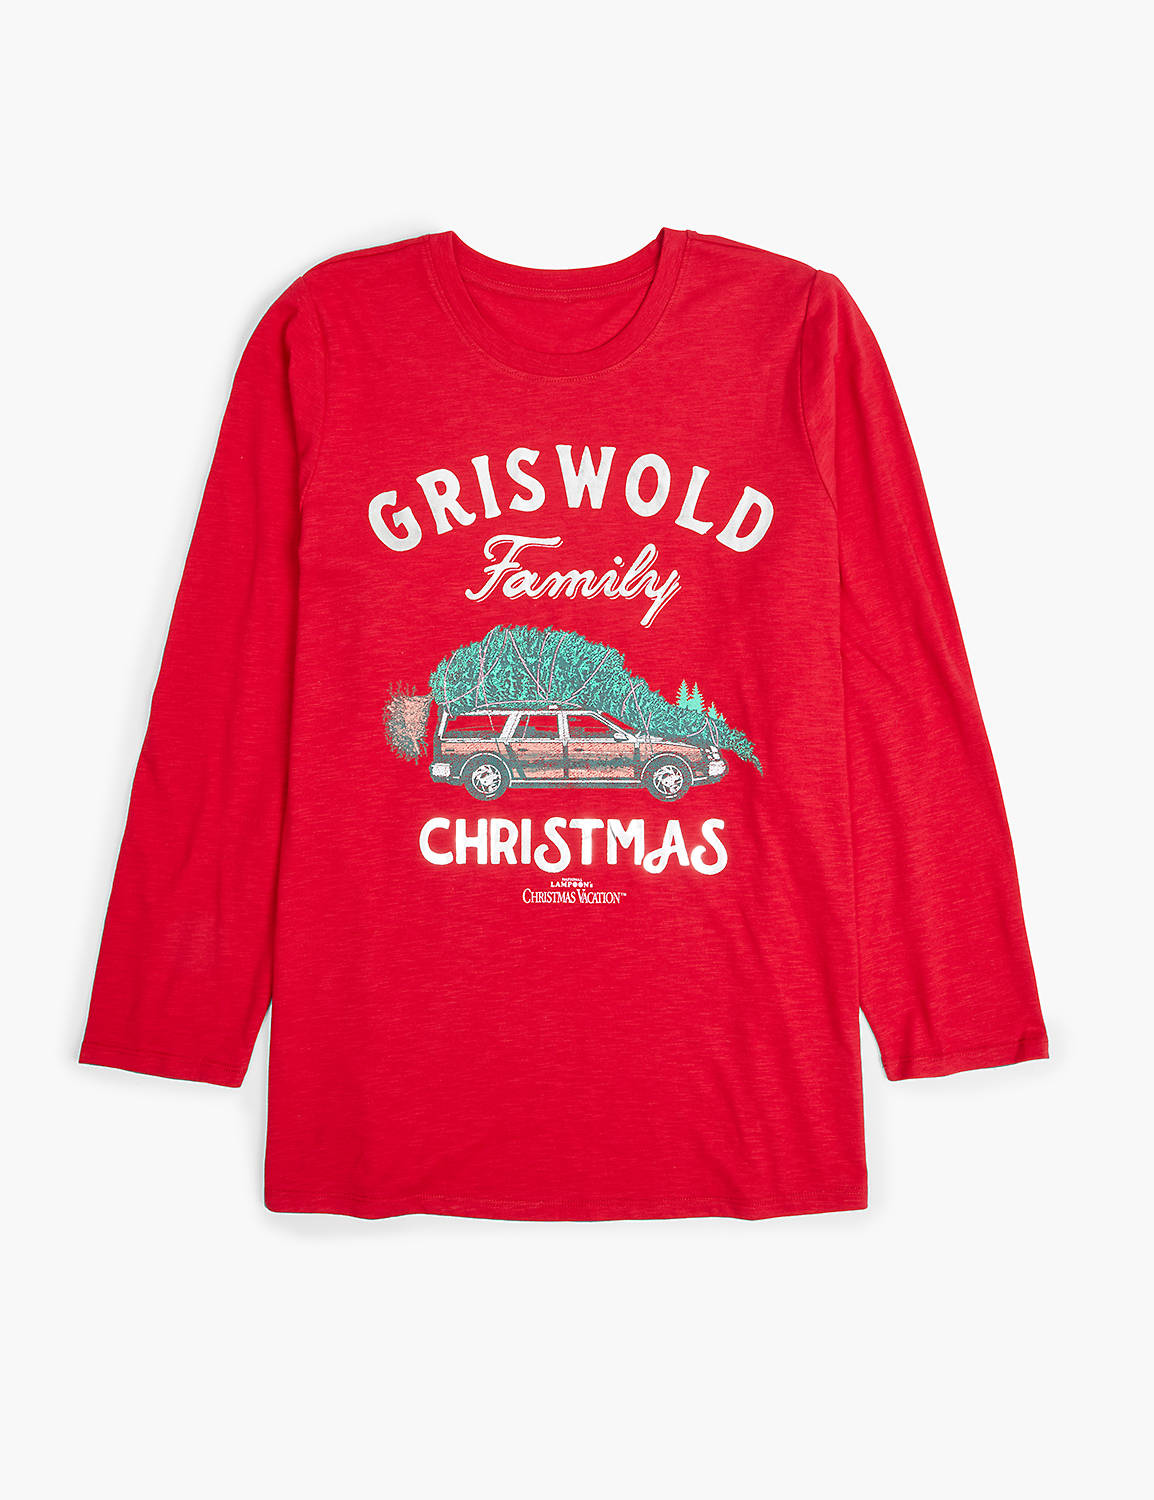 lane bryant griswold family christmas graphic tee 14/16 red